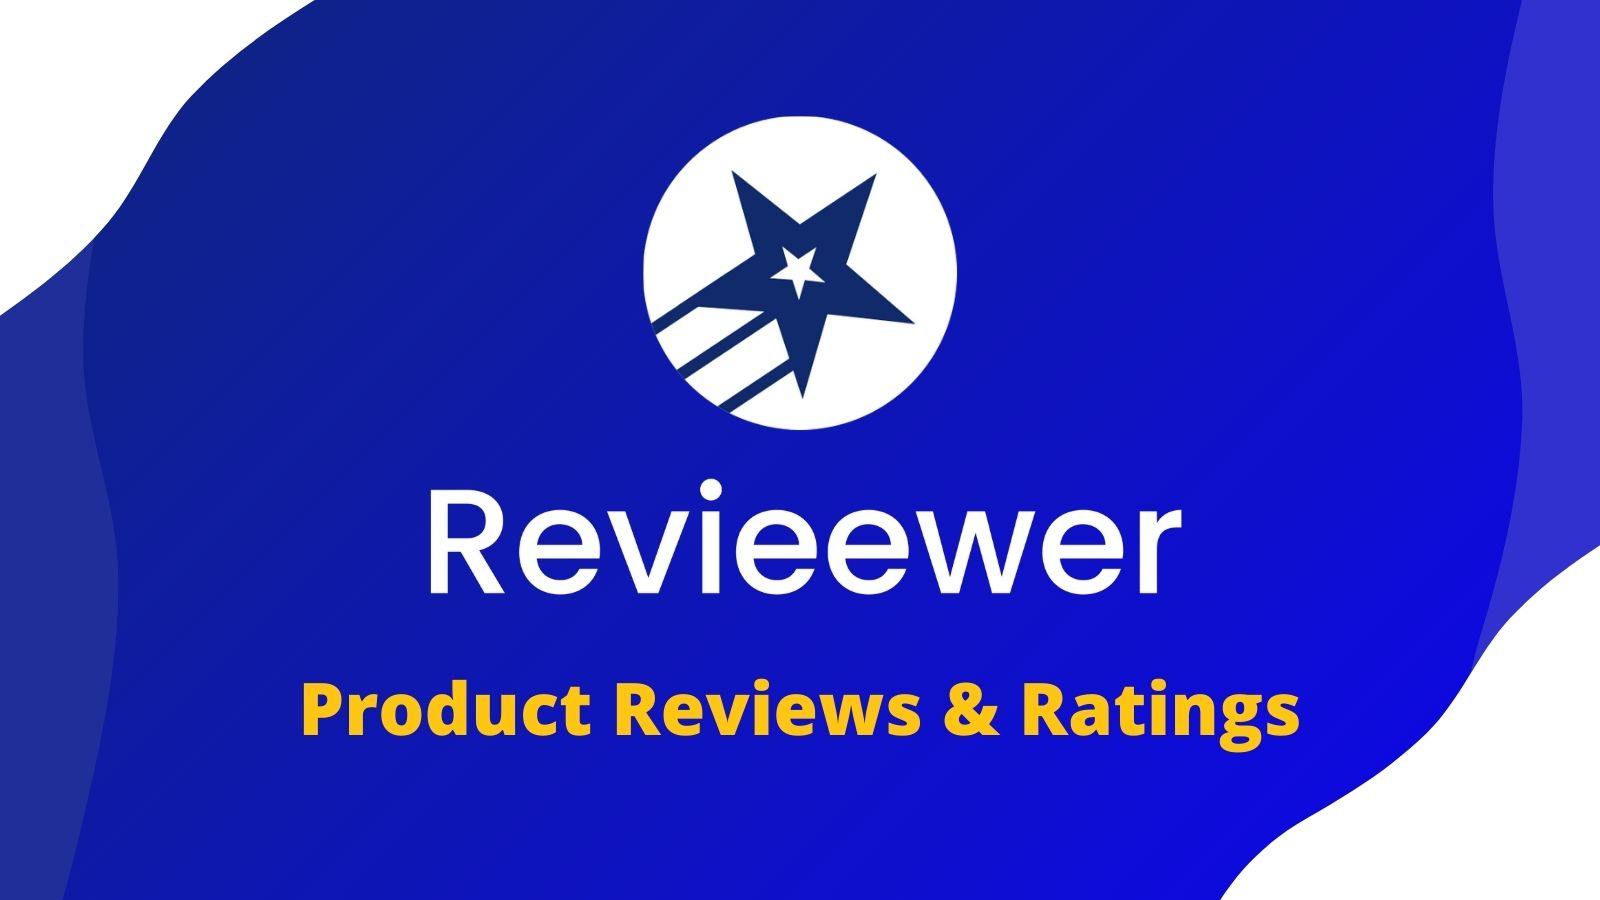 Product Reviews & Ratings